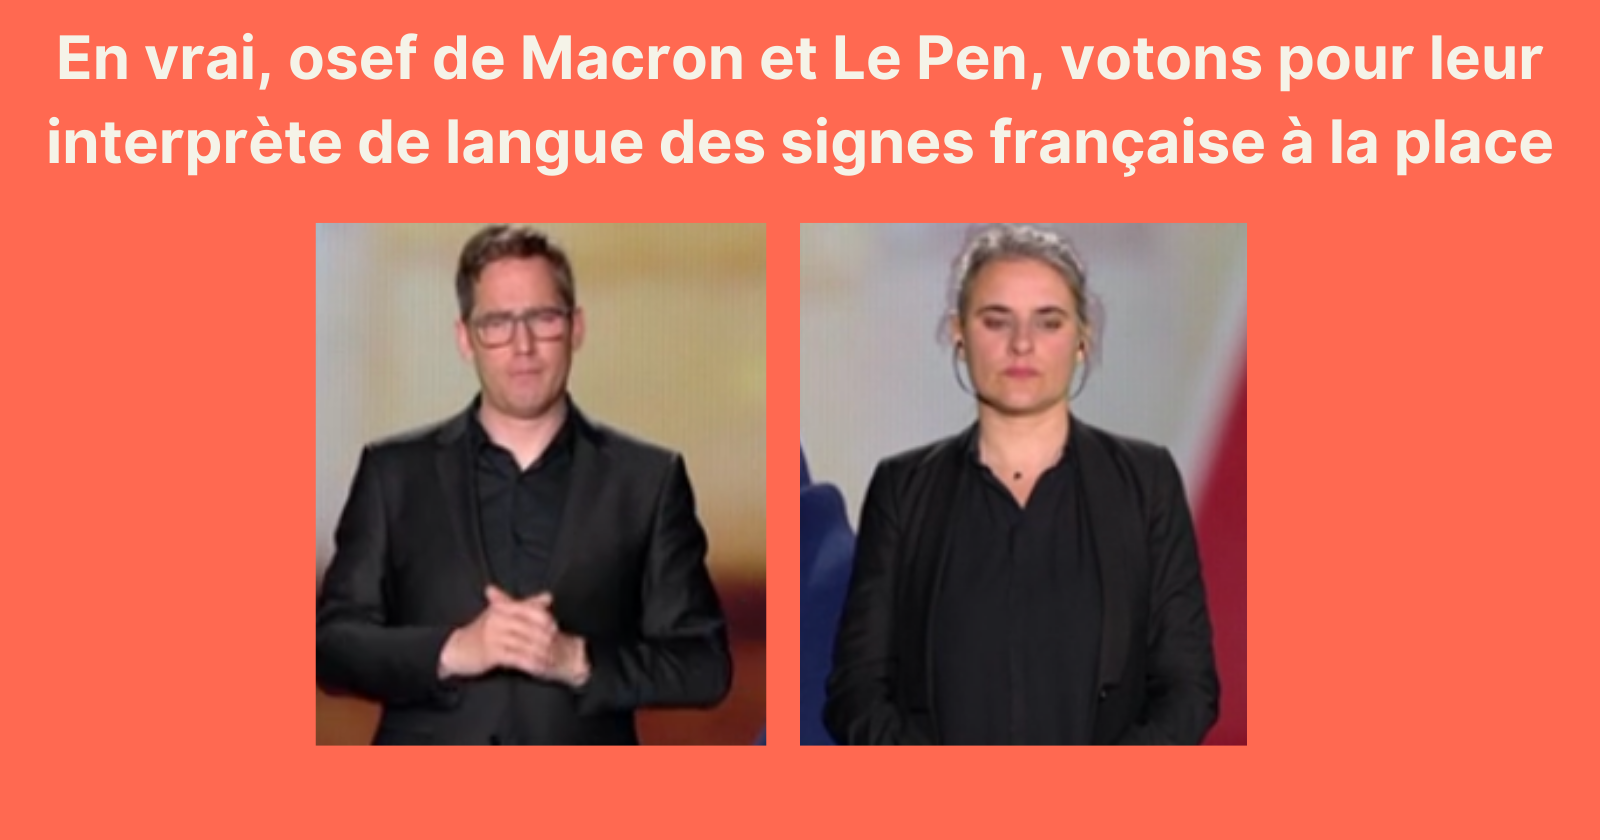 Macron-Le Pen debate: For internet users, the winners are the sign language interpreters